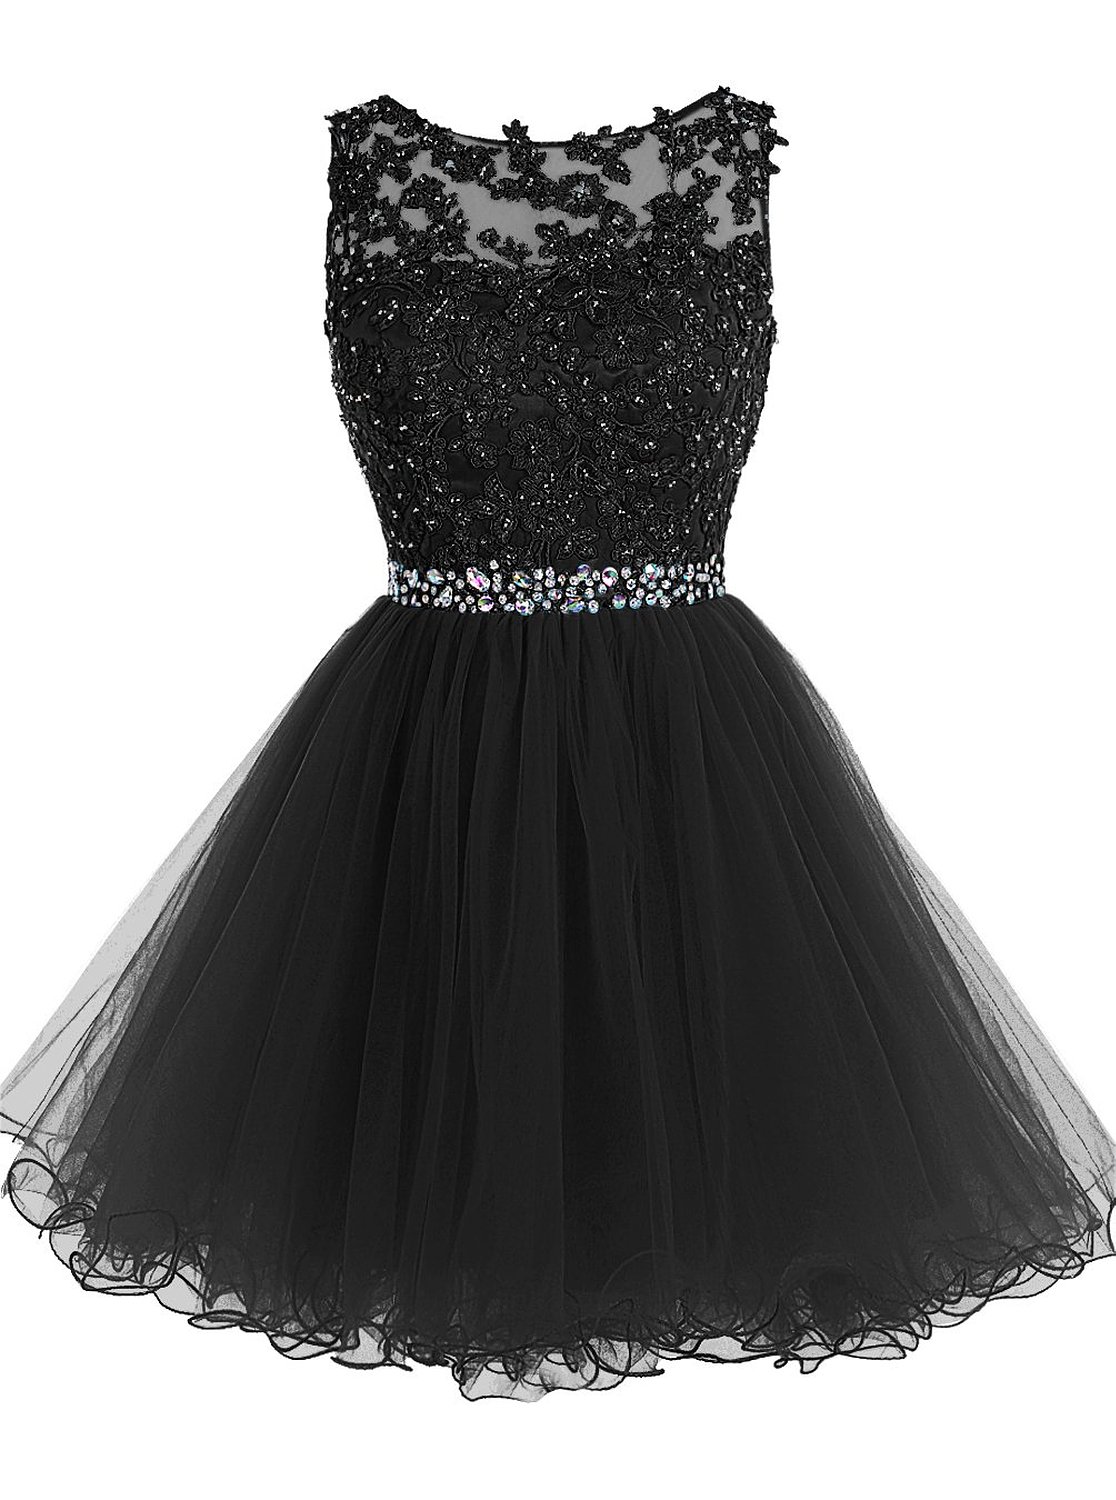 Sexy Short Black Homecoming Dresses Prom Dresses Party Gowns